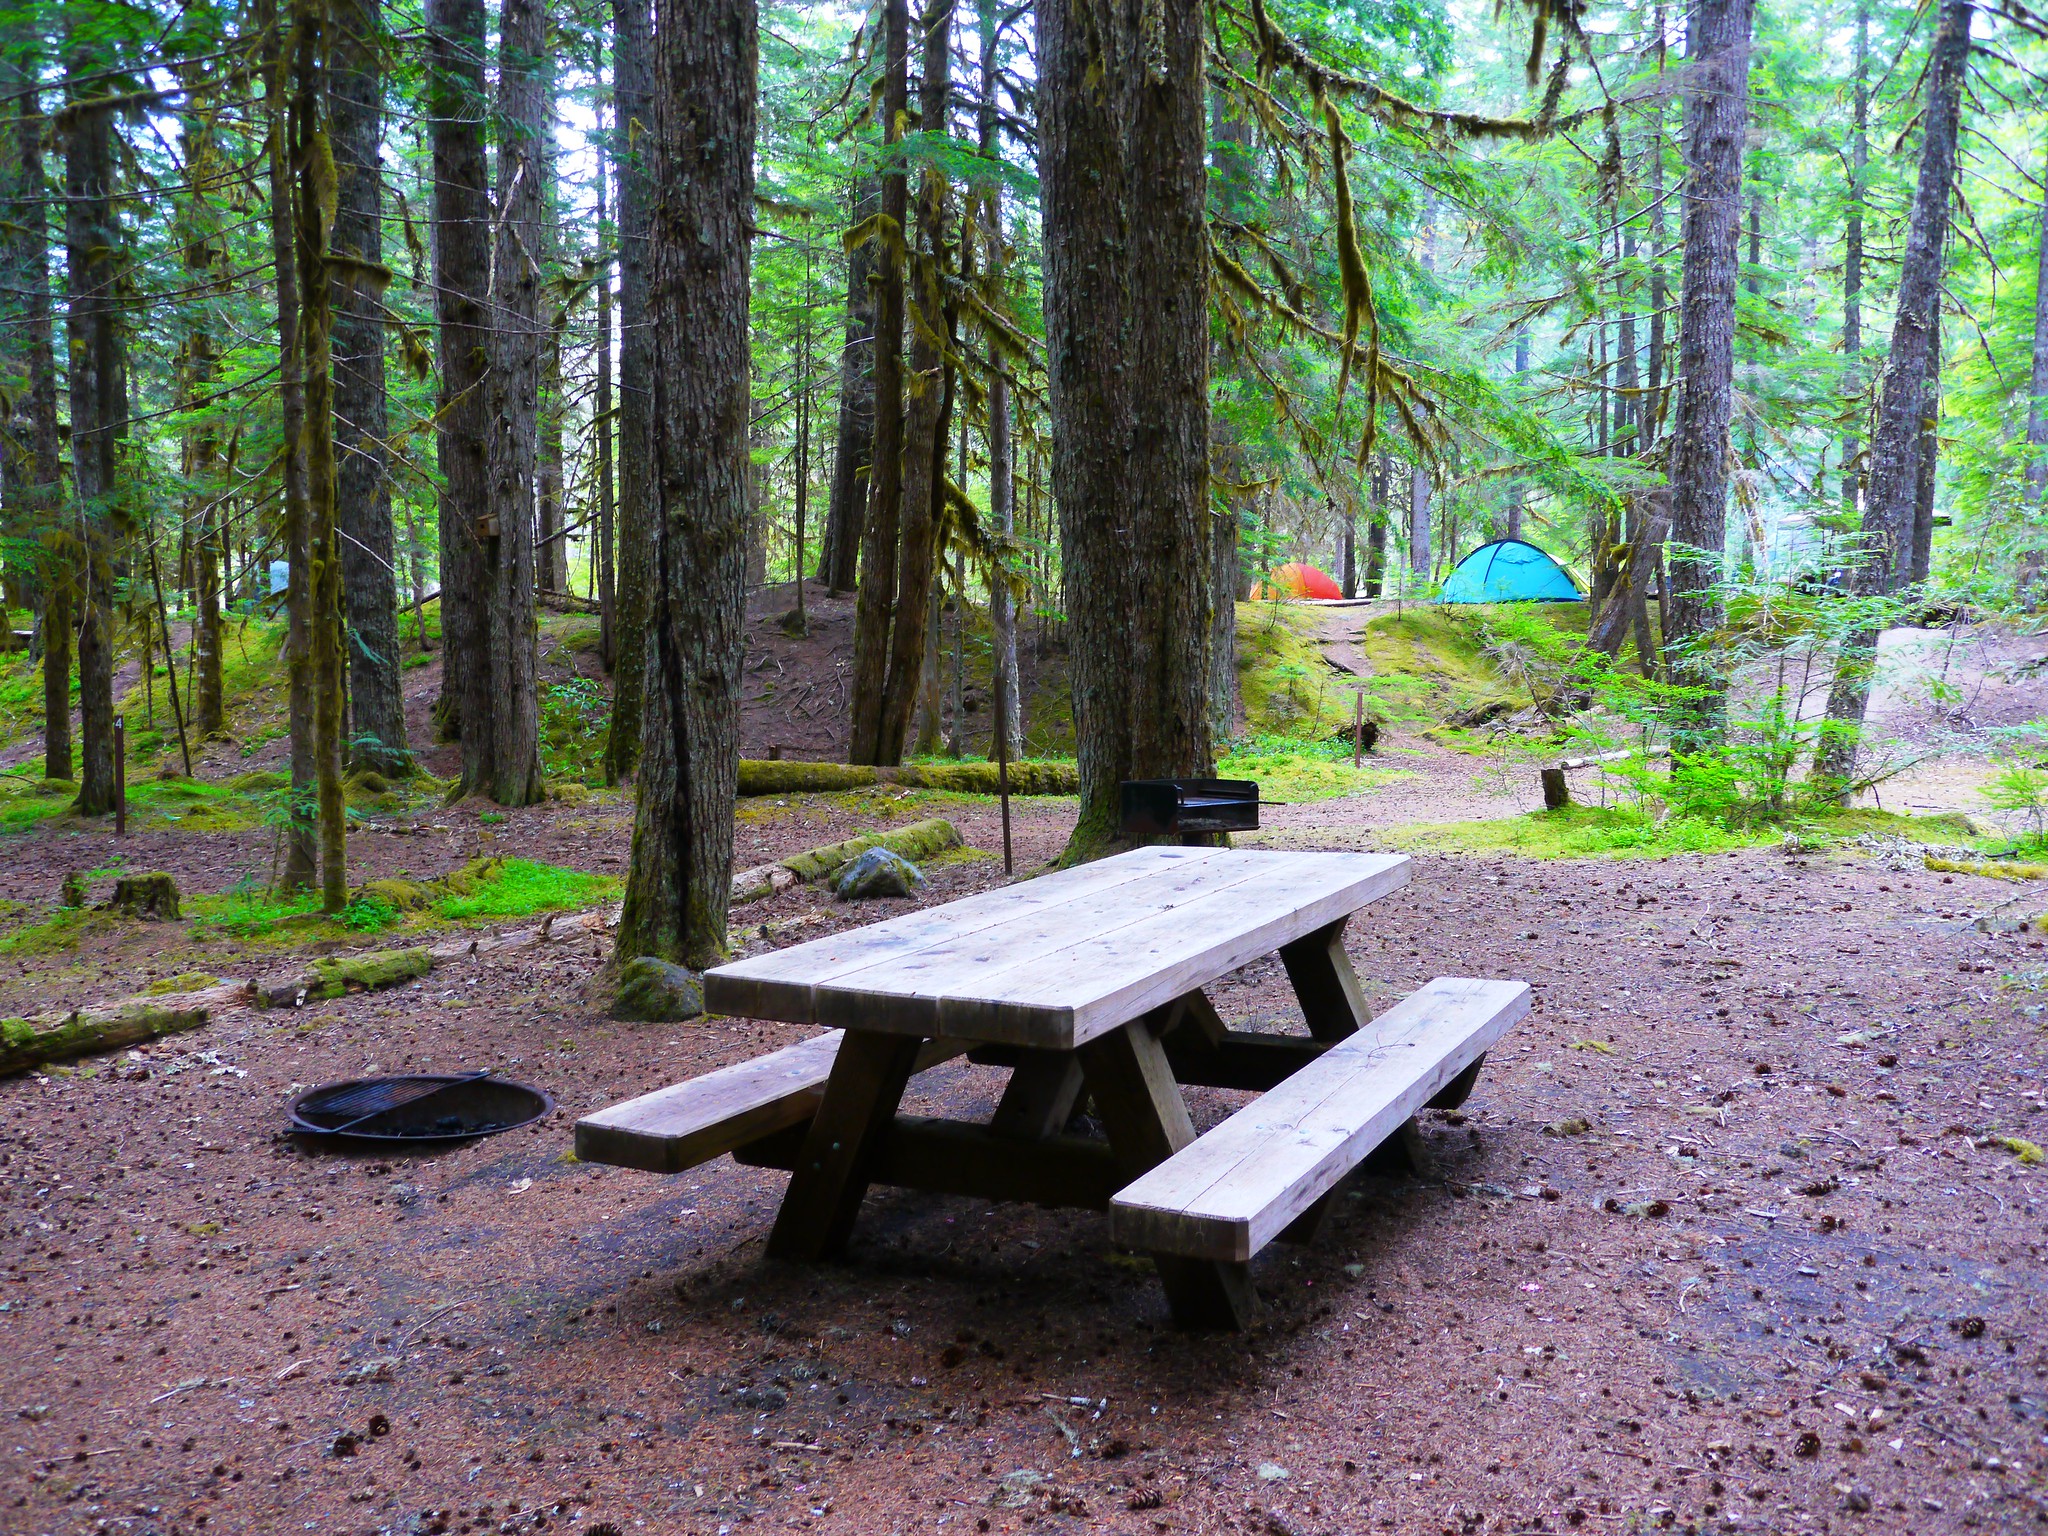 An empty campsite with a picnic table and firepit